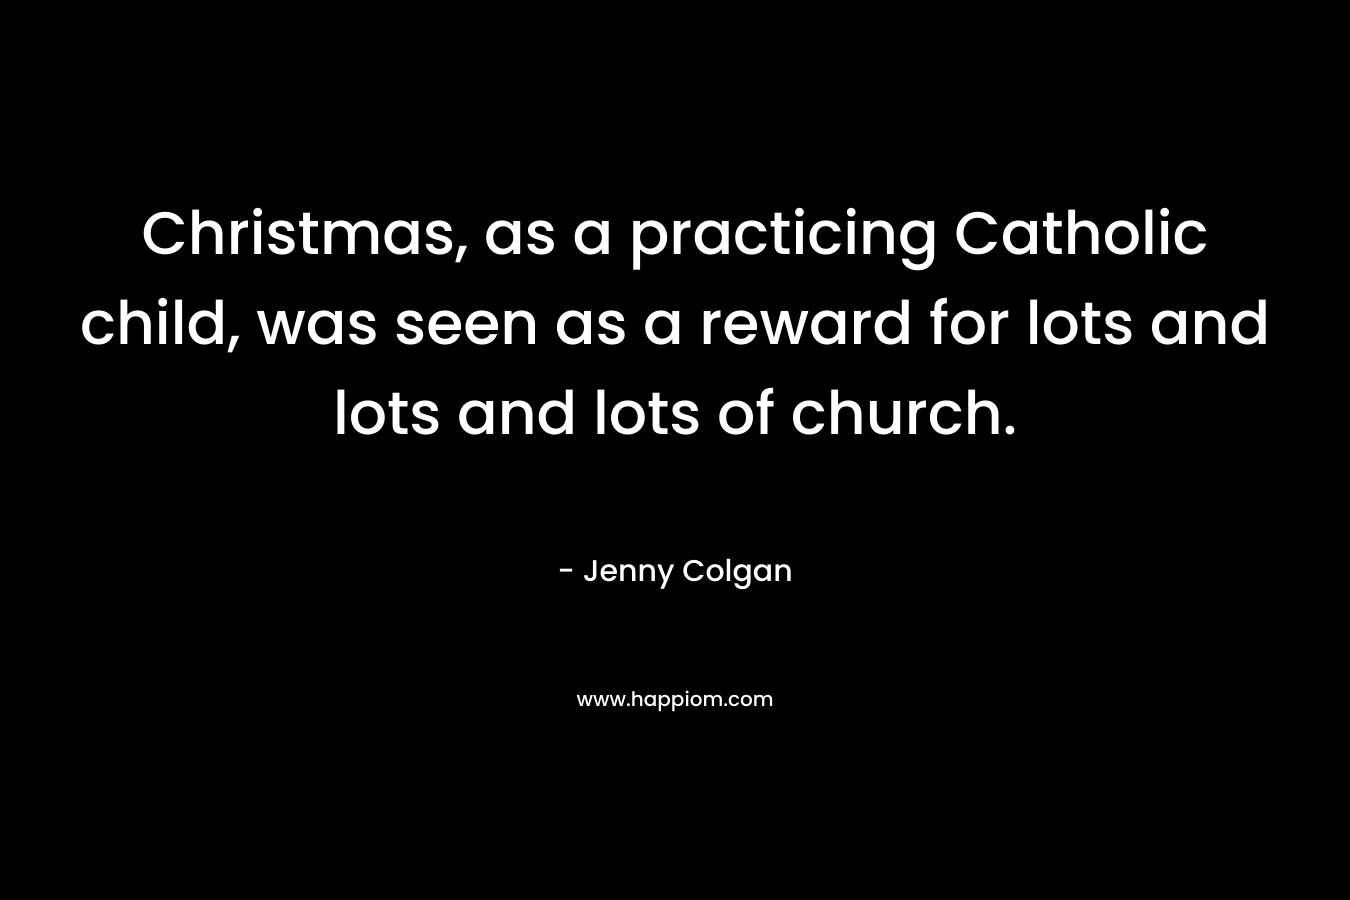 Christmas, as a practicing Catholic child, was seen as a reward for lots and lots and lots of church. – Jenny Colgan